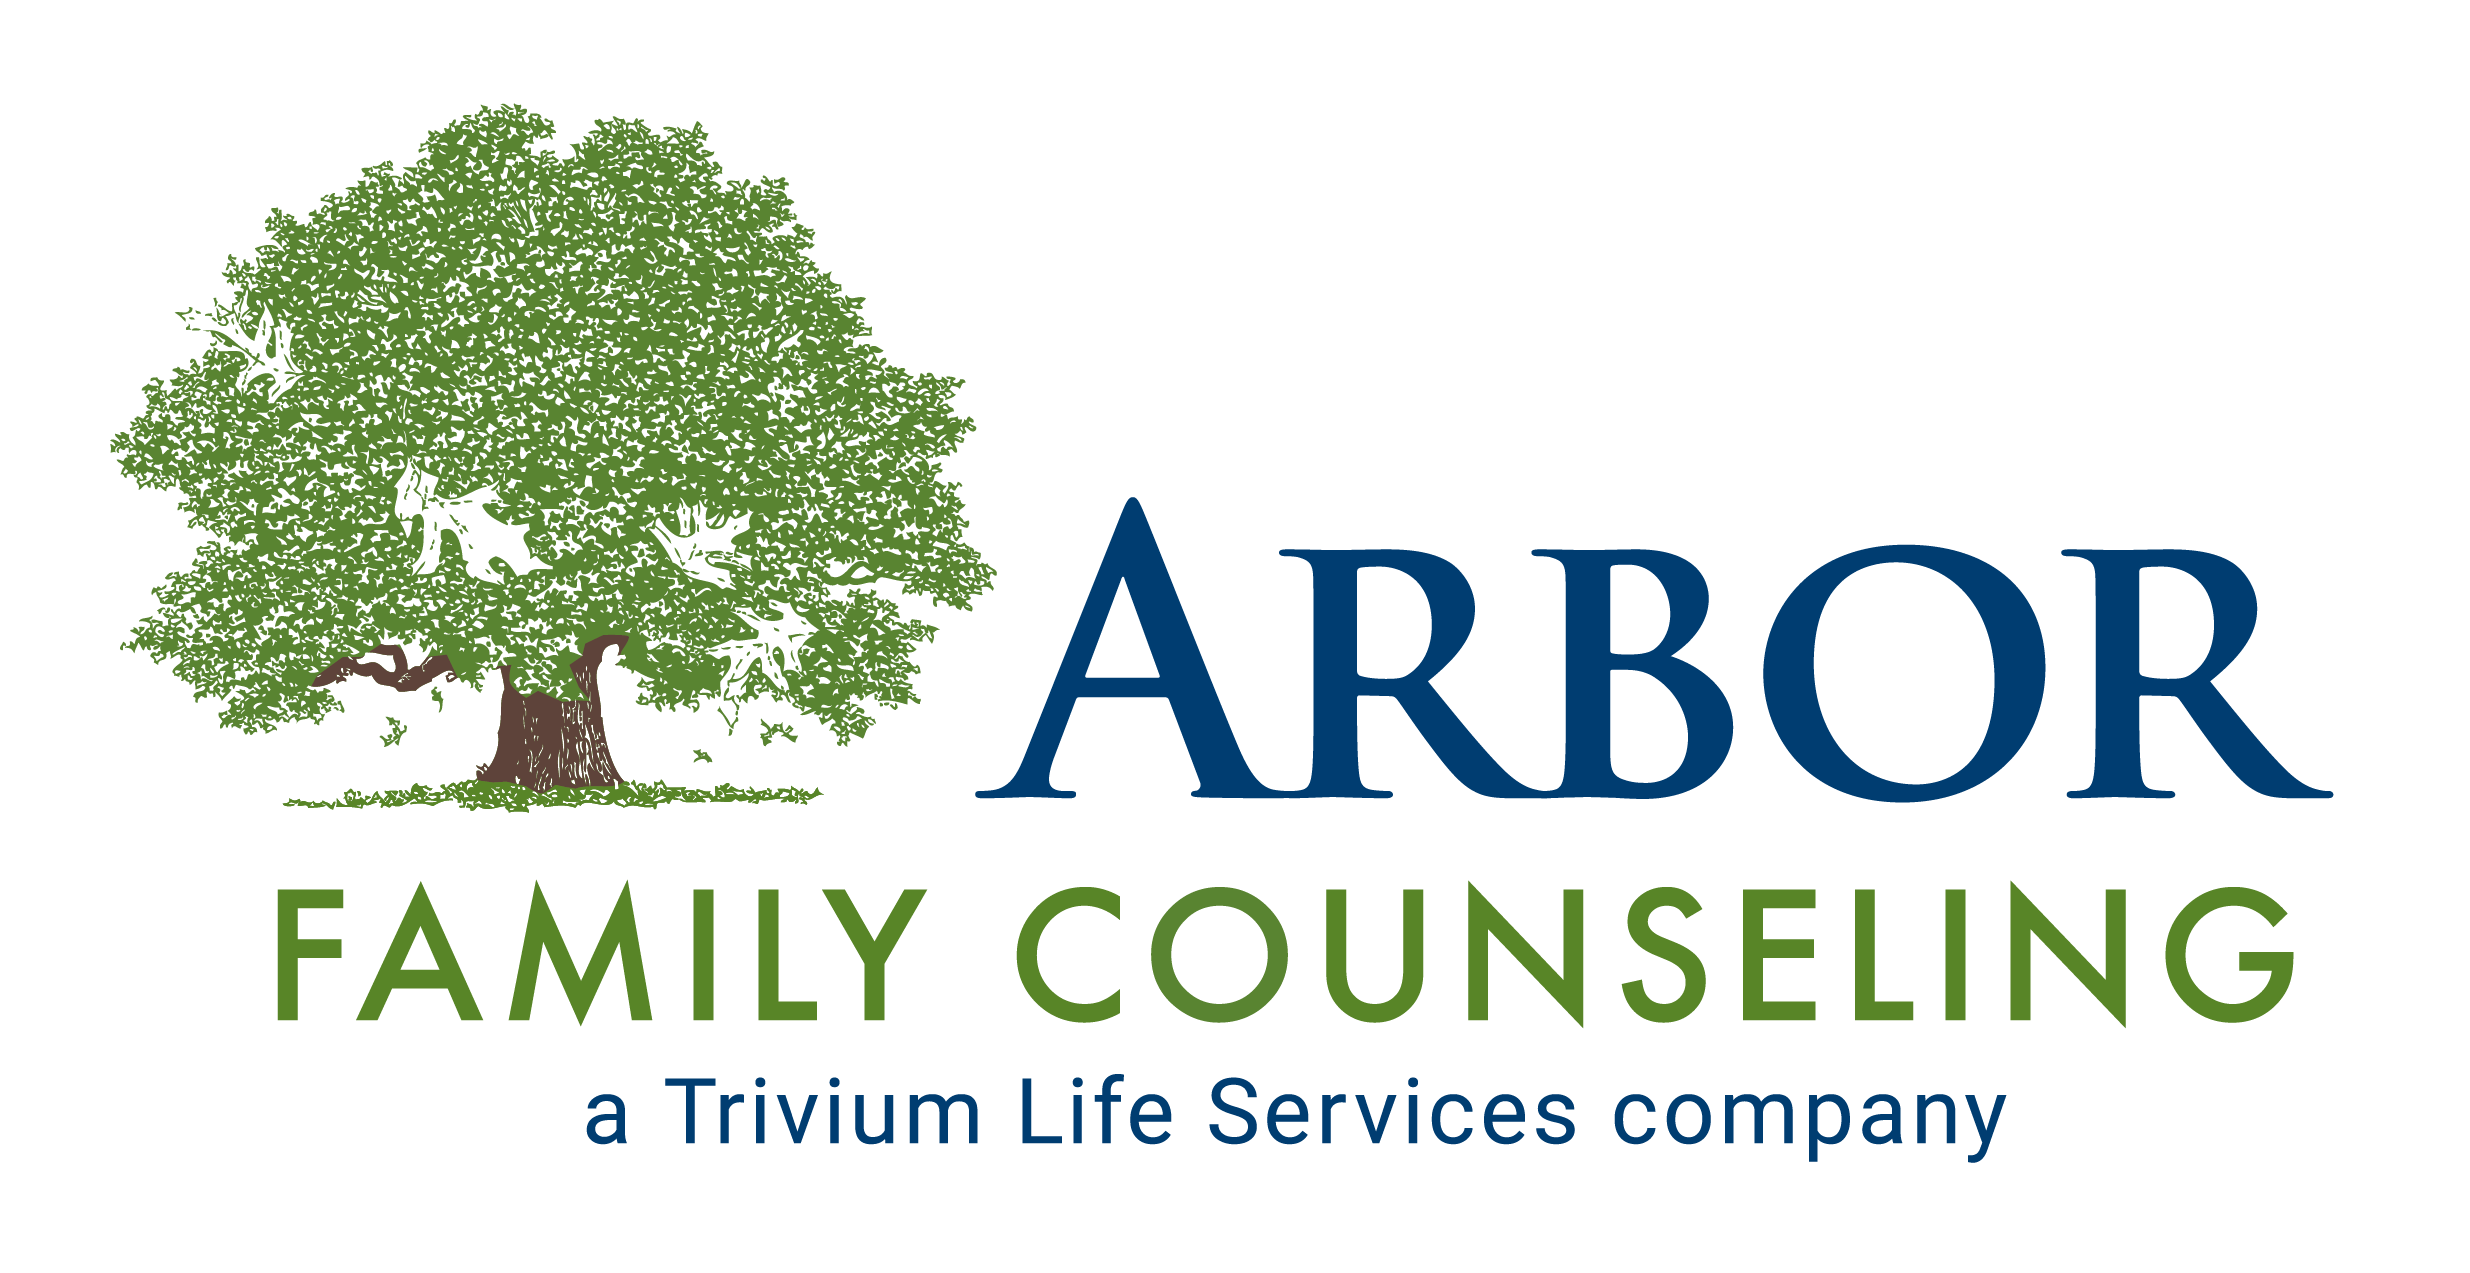 A tree with green leaves on the left. Writing says "Arbor Family Counseling a Trivium Life Services company"